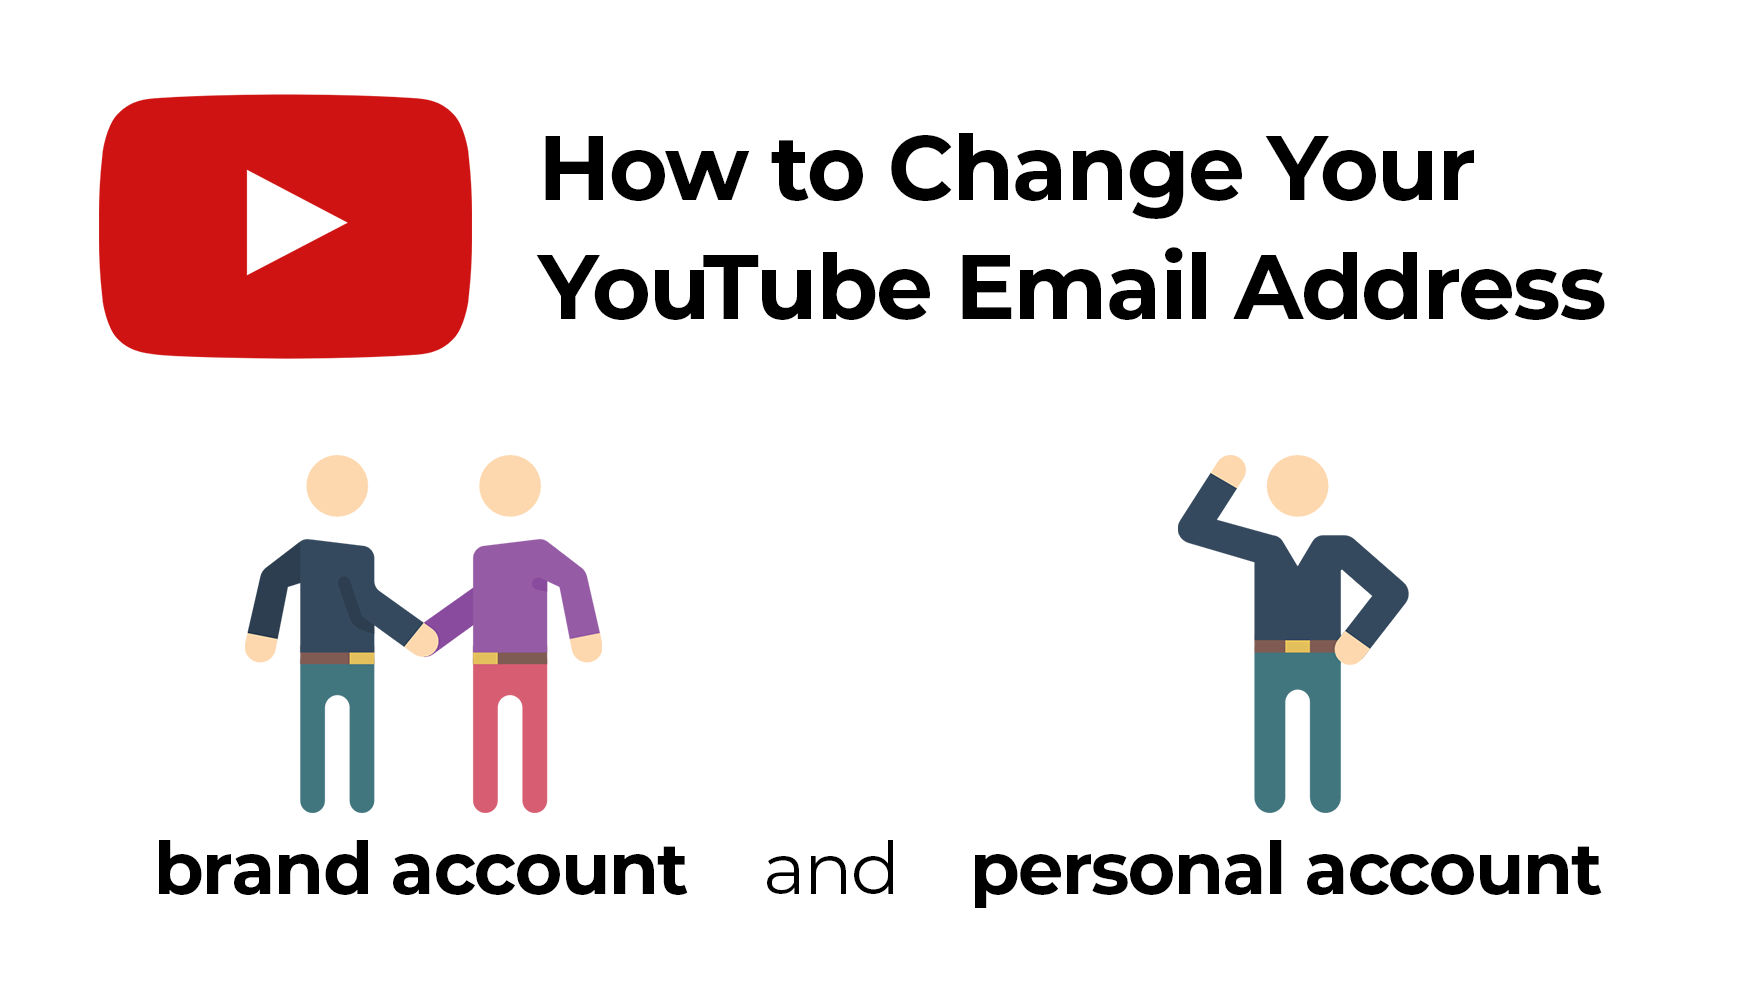 How to change your YouTube email address